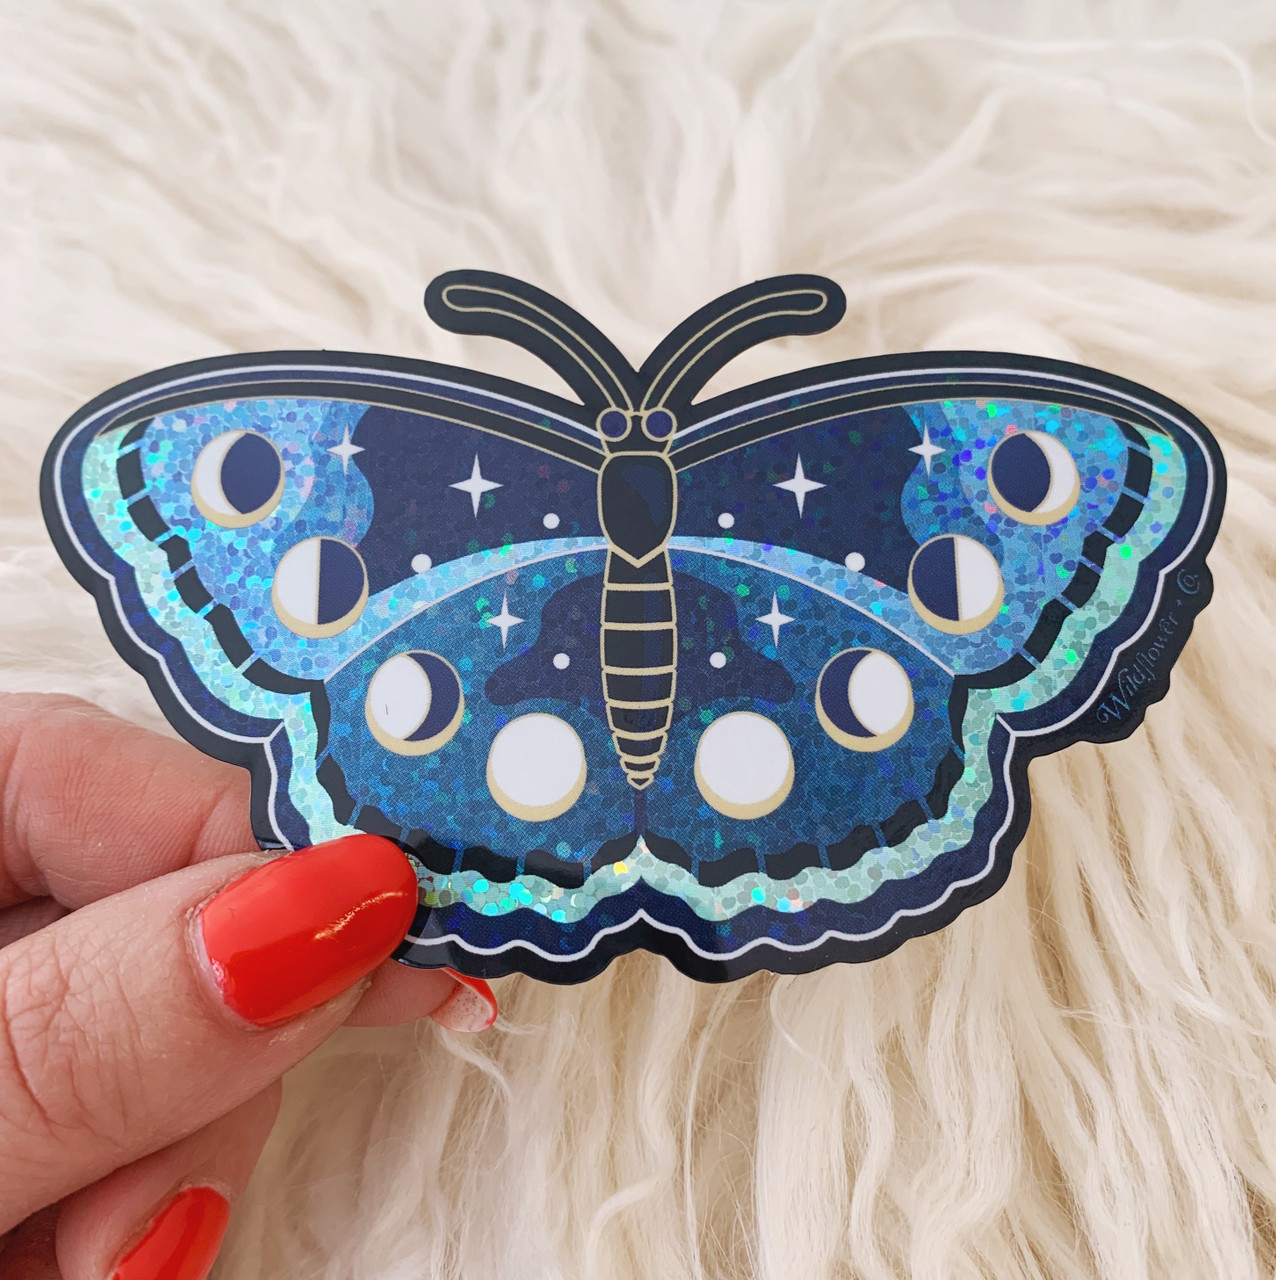 https://cdn10.bigcommerce.com/s-3foajvlh/products/1657/images/7451/Lunar_Butterfly_Sticker_-_Glitter_Holographic_Vinyl_Stickers_-_Lunar_Moth_-_Night_Butterfly_-_Moon_Phases_-_Wildflower_Co_8__36165.1585414552.1280.1280.JPG?c=2